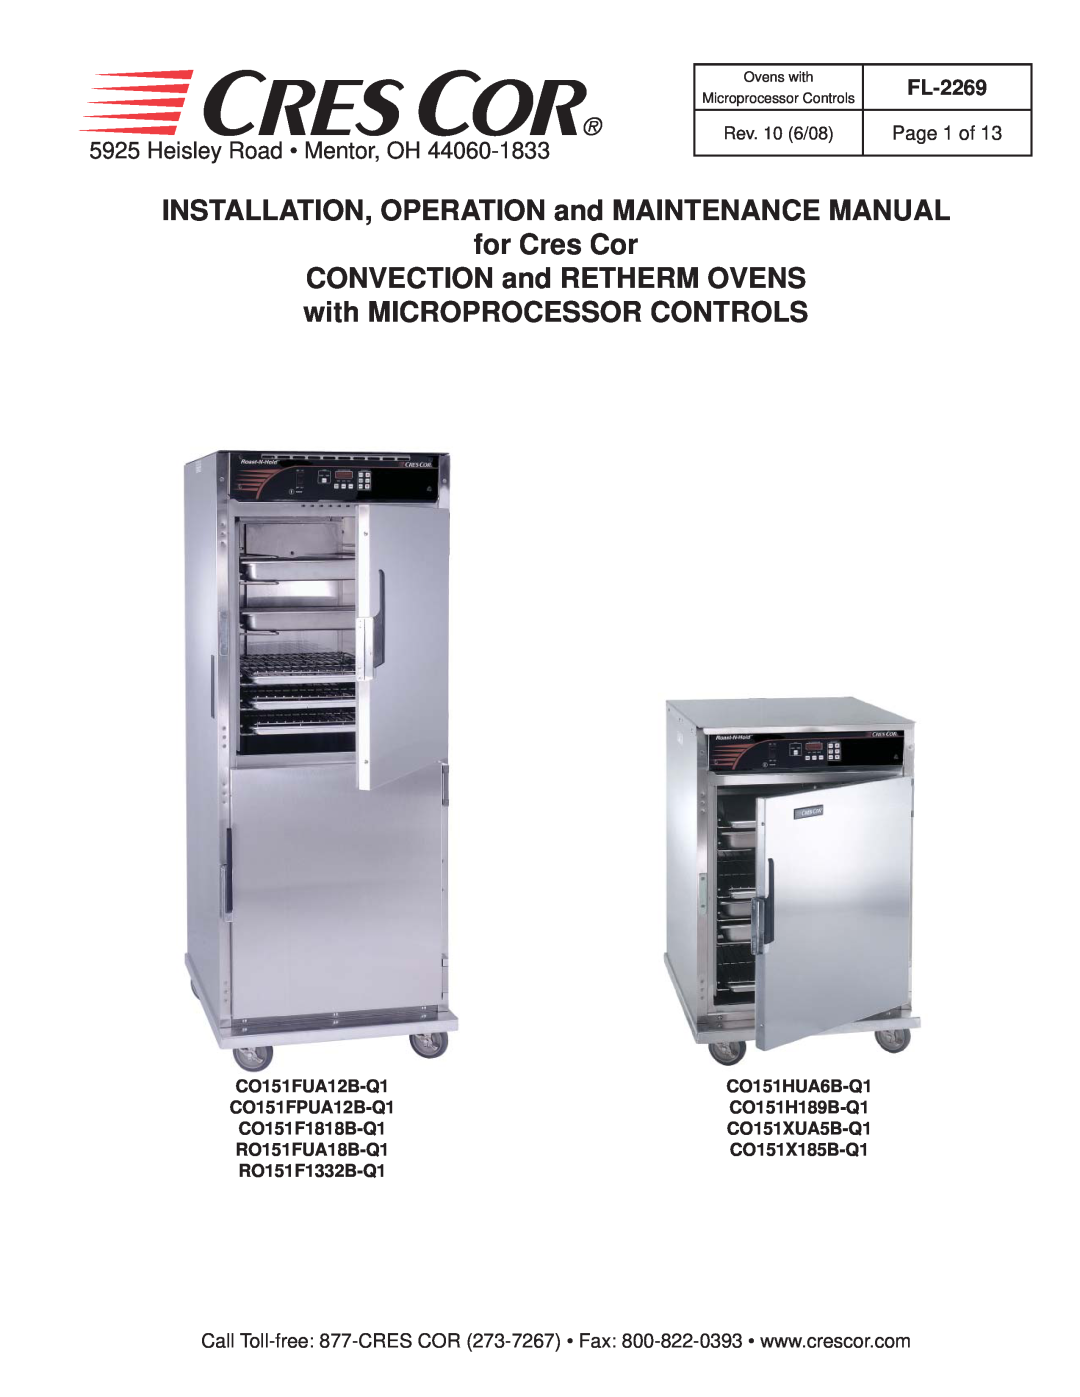 Cres Cor CO151FUA12B-Q1 manual INSTALLATION, OPERATION and MAINTENANCE MANUAL for Cres Cor, Heisley Road Mentor, OH 